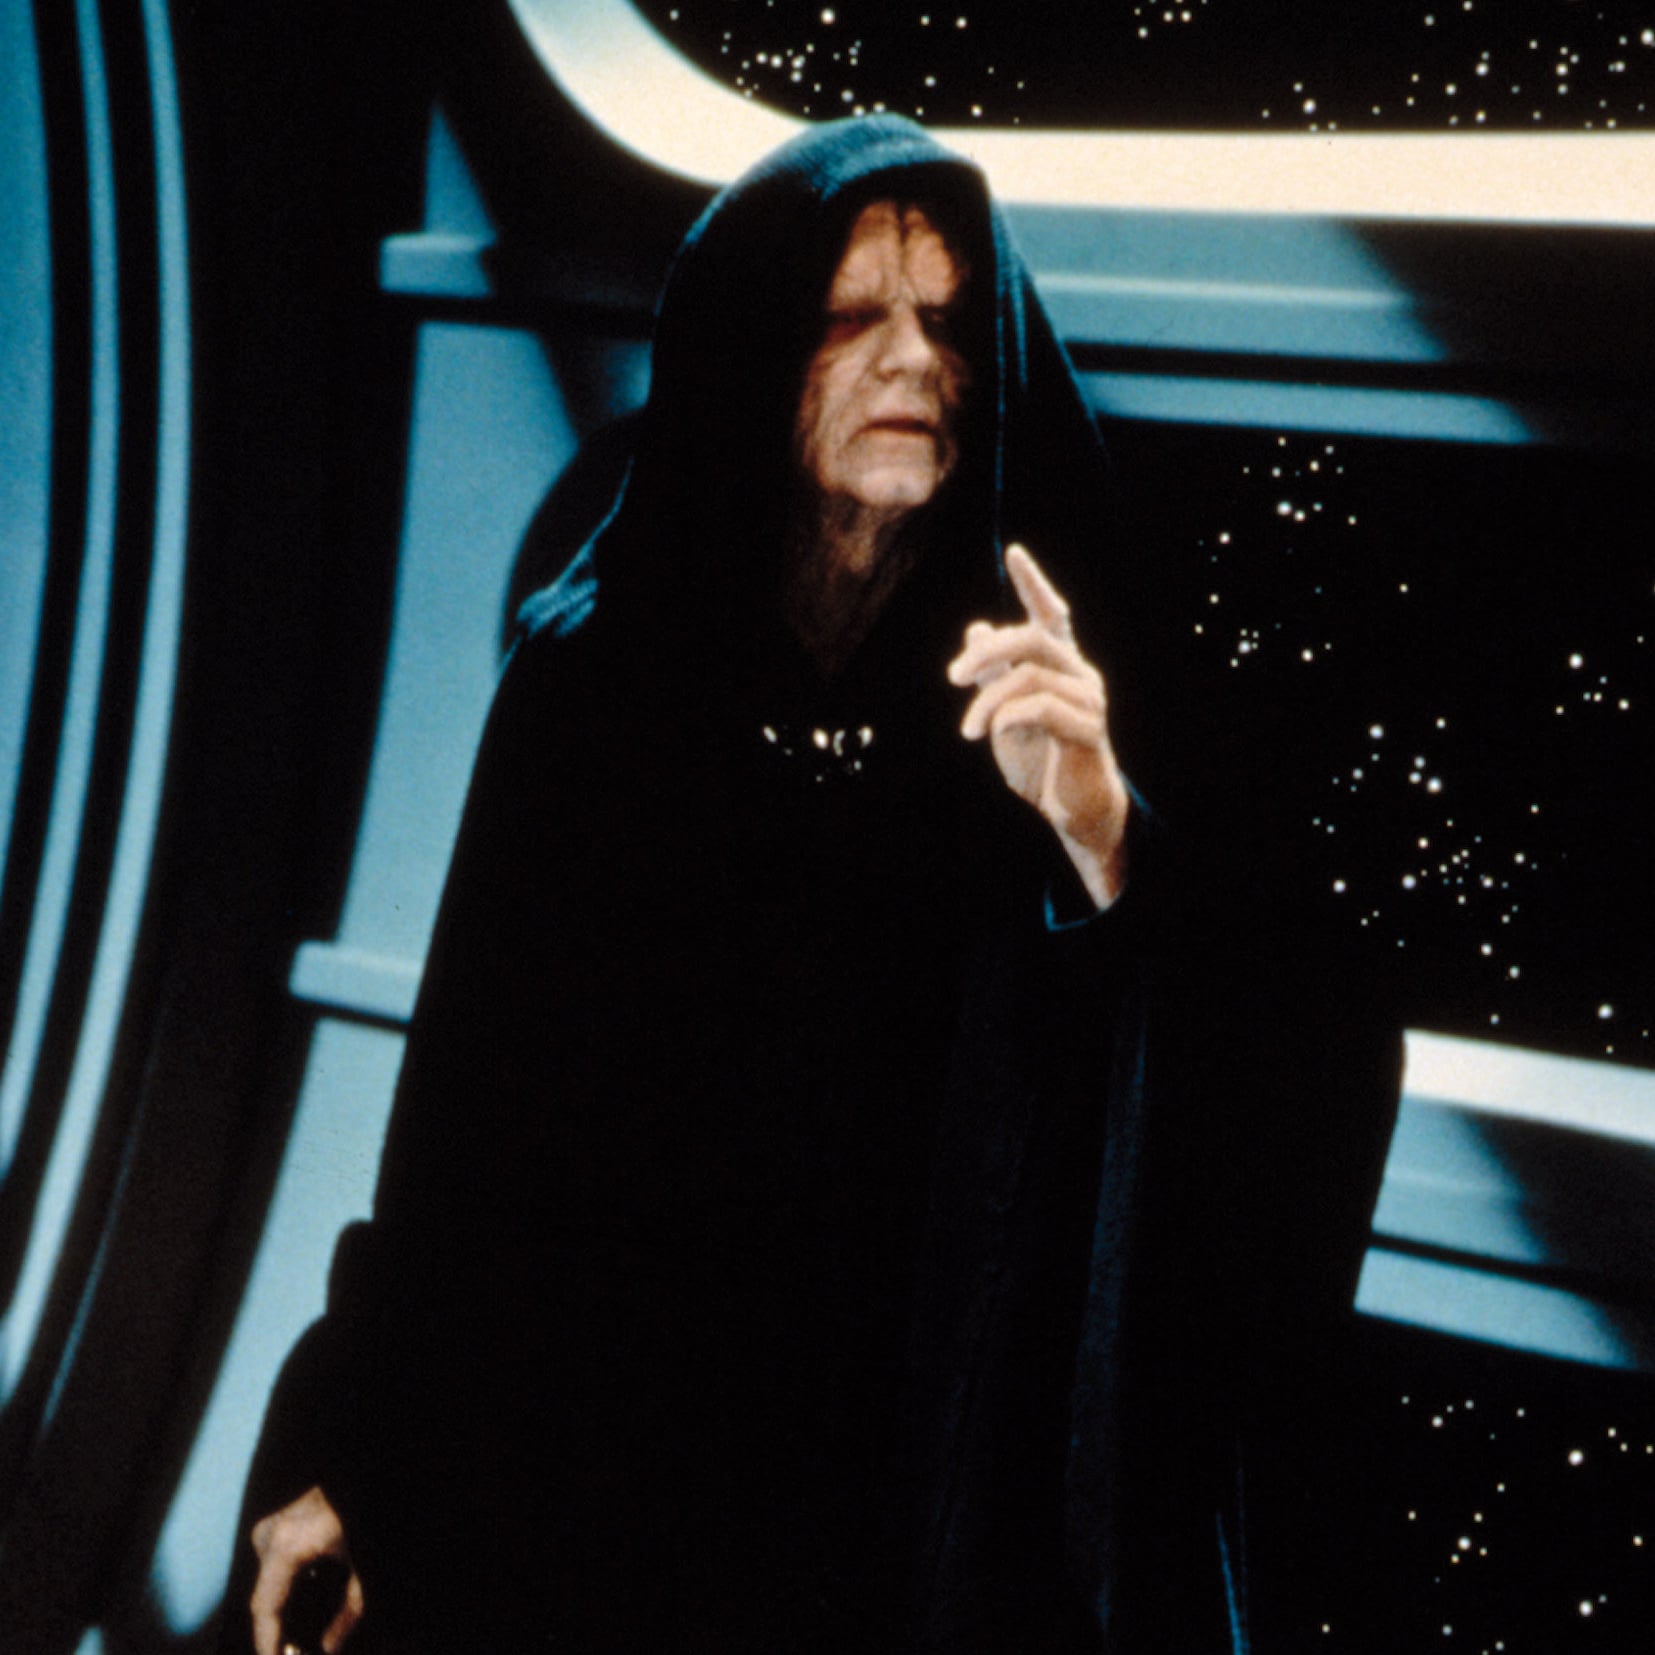 I really wish Palpatine kept his more regal appearance throughout